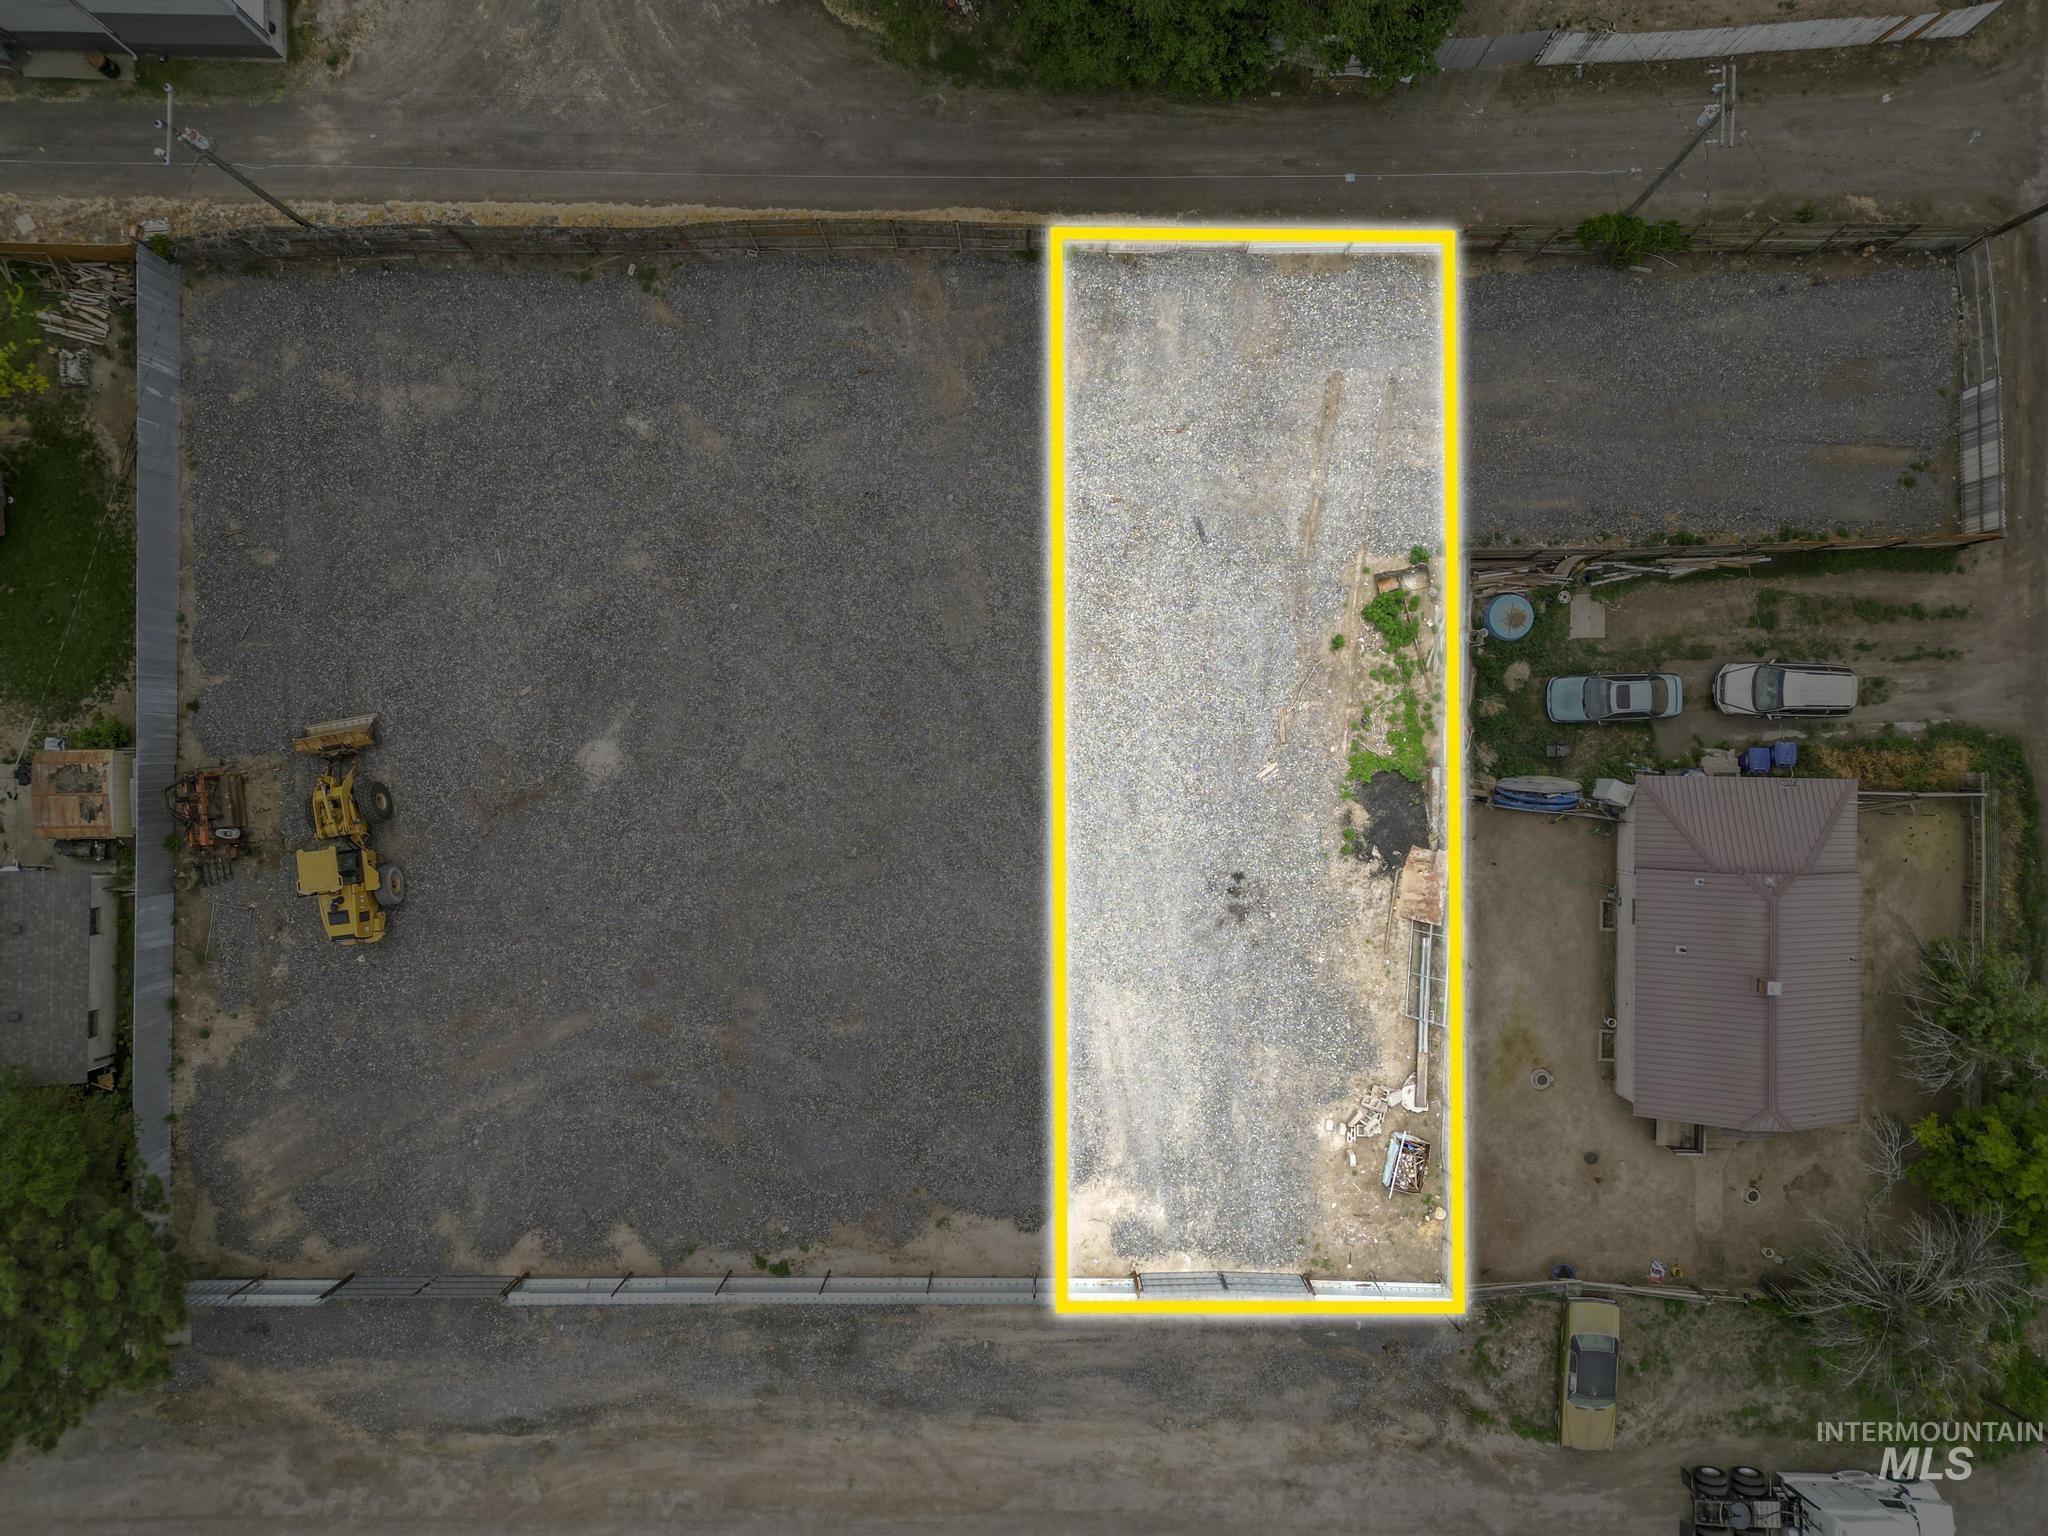 TBD 130 W Ave C (Lots 5, 6, 7 & 16-20), Jerome, Idaho 83338, Business/Commercial For Sale, Price $400,000,MLS 98882669